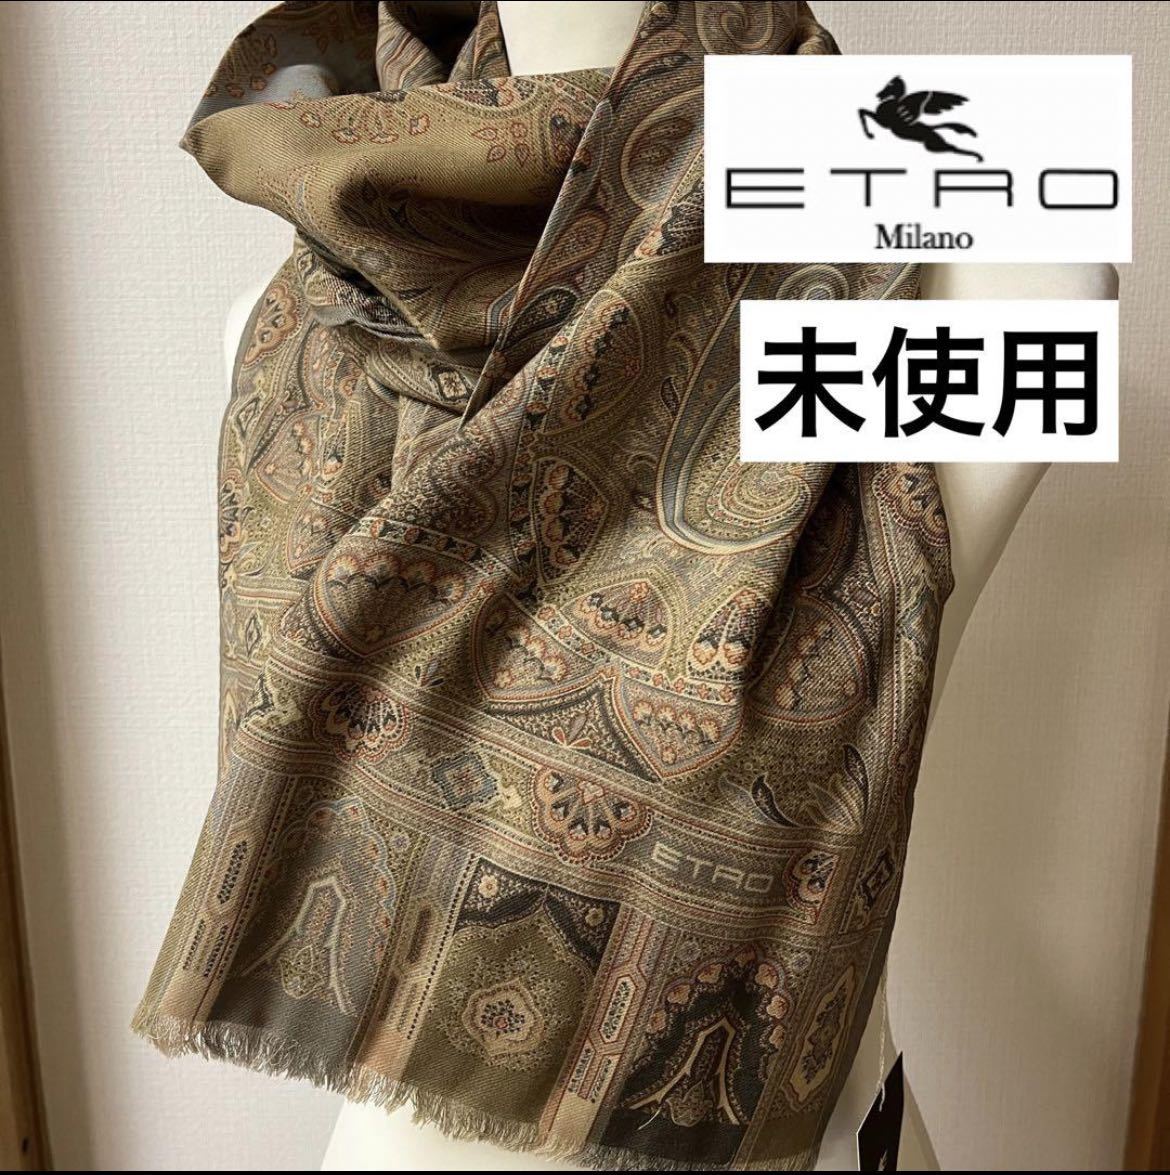 ETRO エトロ 大判 ストール ペイズリー 総柄 正規品販売! - 小物